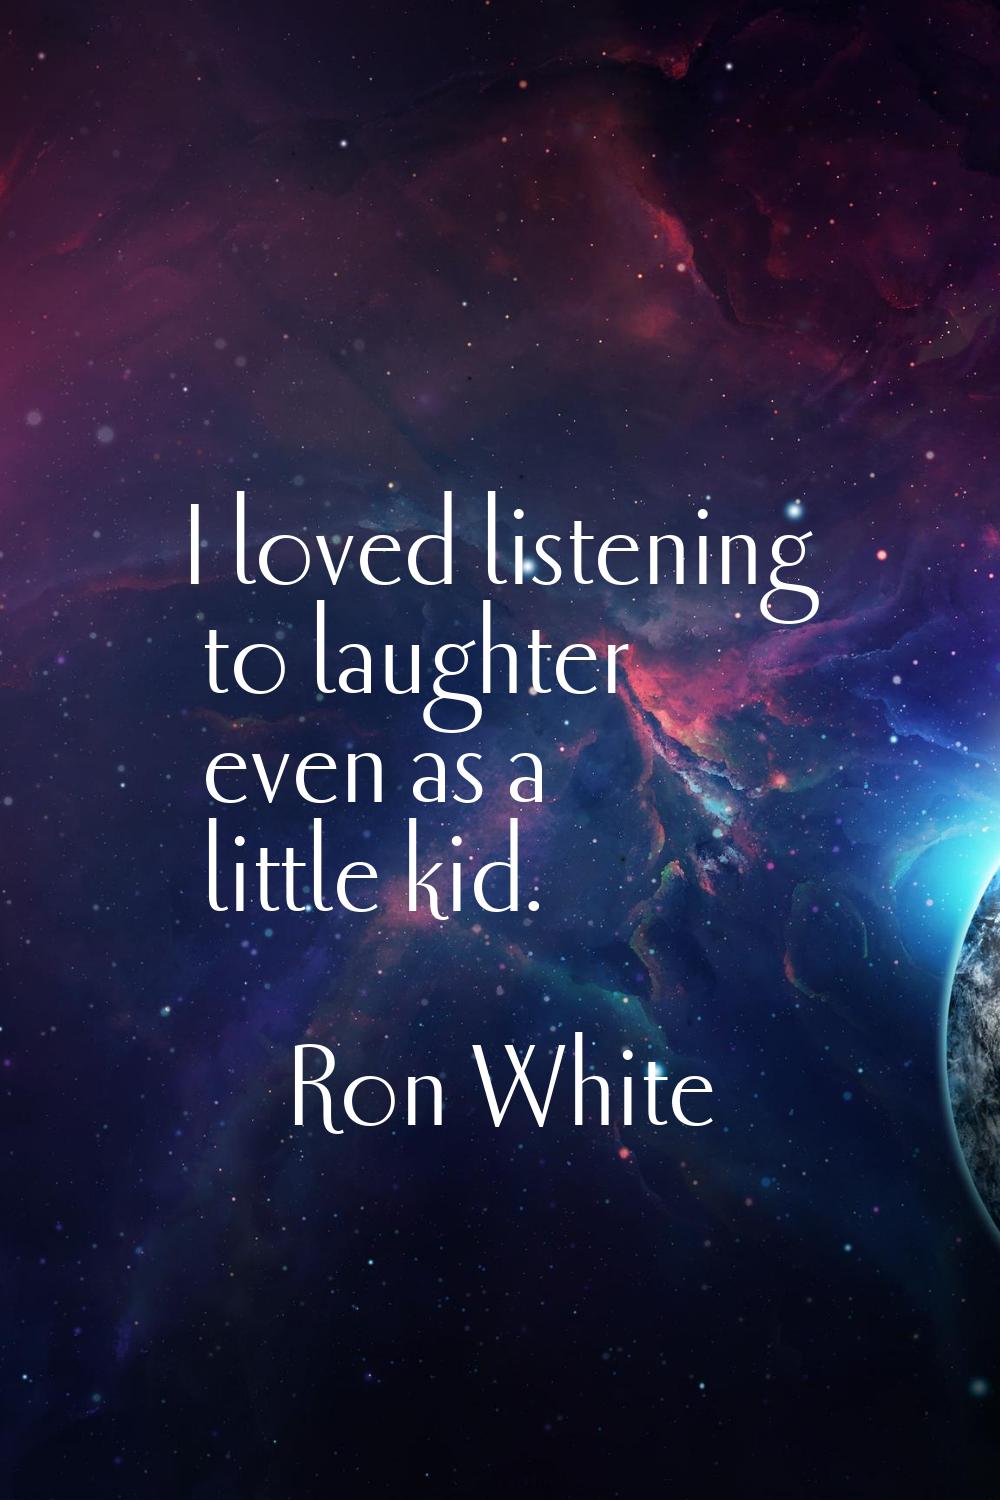 I loved listening to laughter even as a little kid.